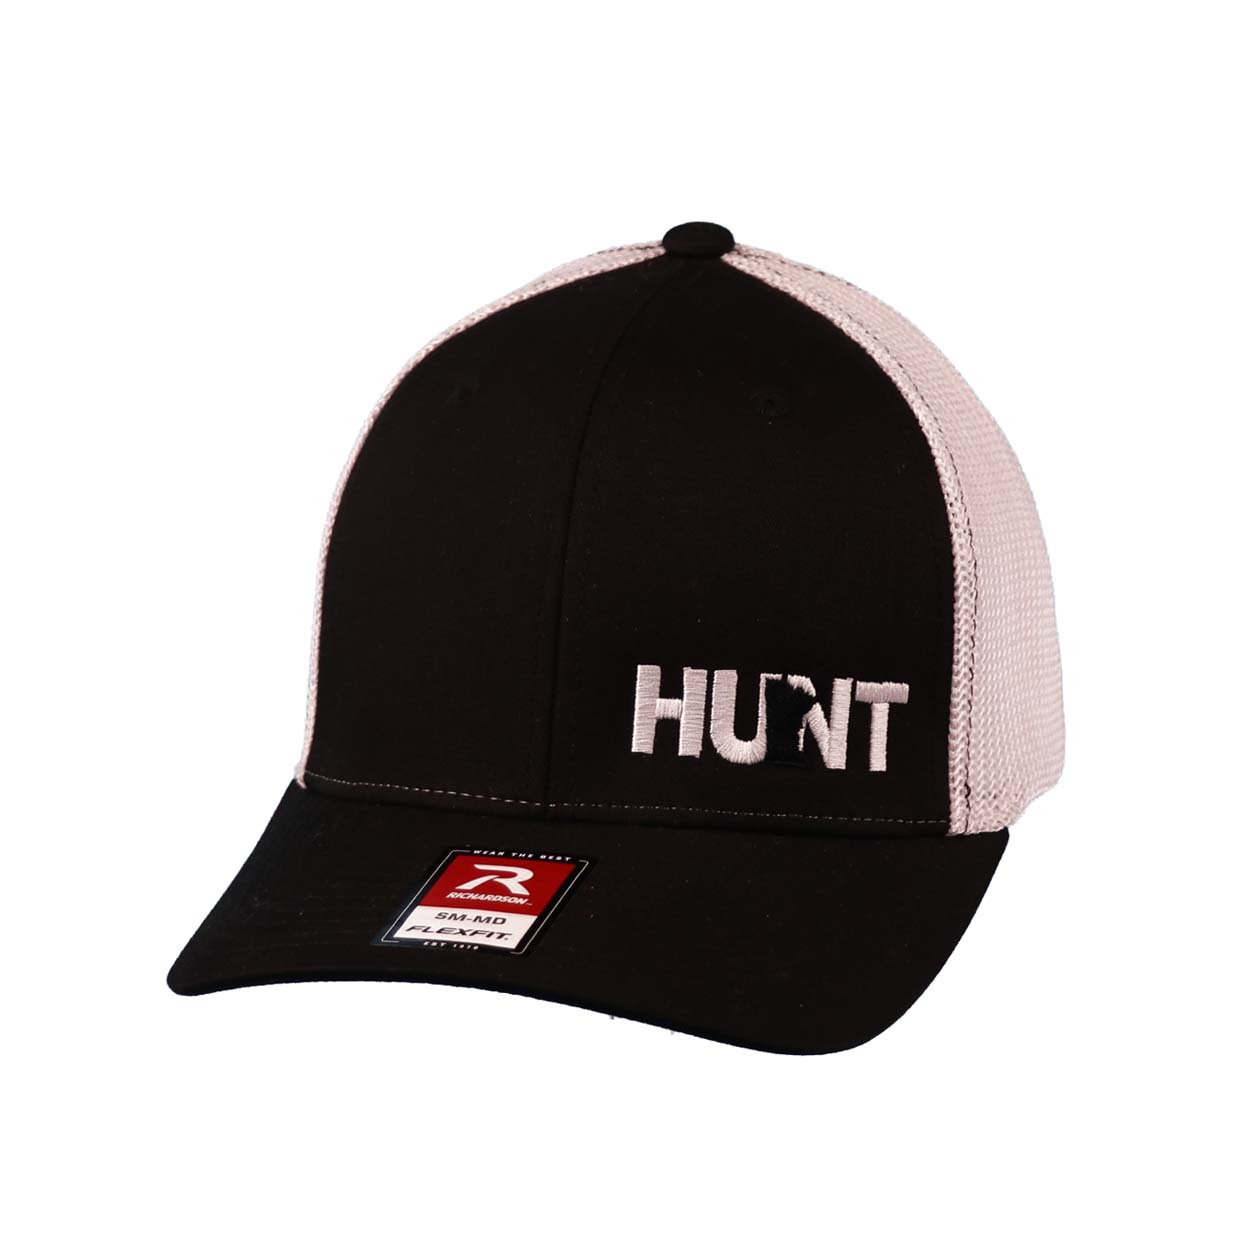 Hunt Minnesota Night Out Embroidered Mesh Flexfit Hat Black/White